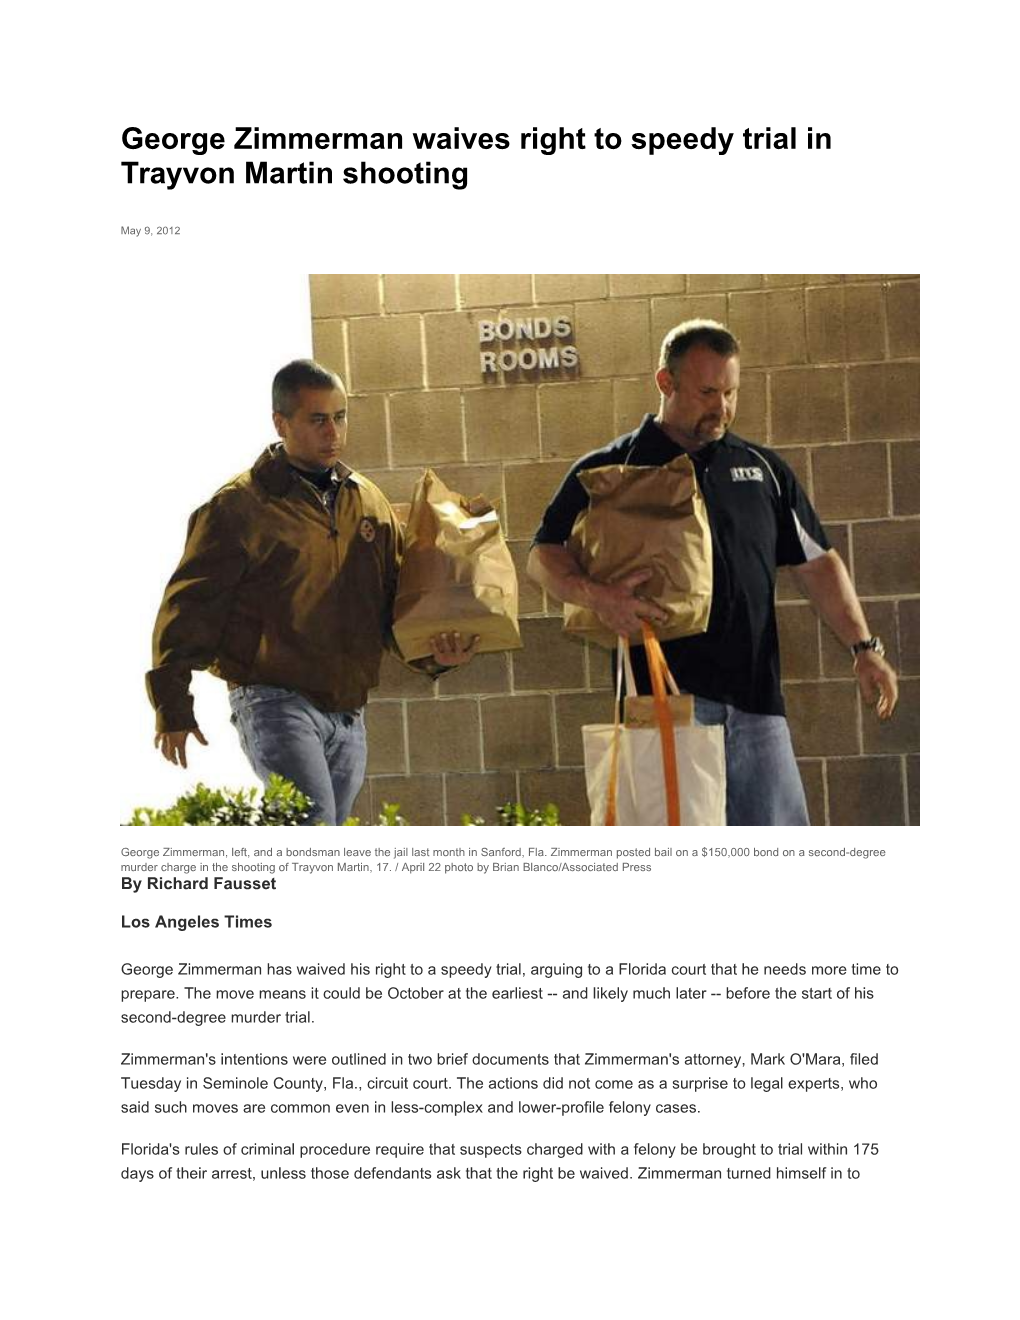 George Zimmerman Waives Right to Speedy Trial in Trayvon Martin Shooting